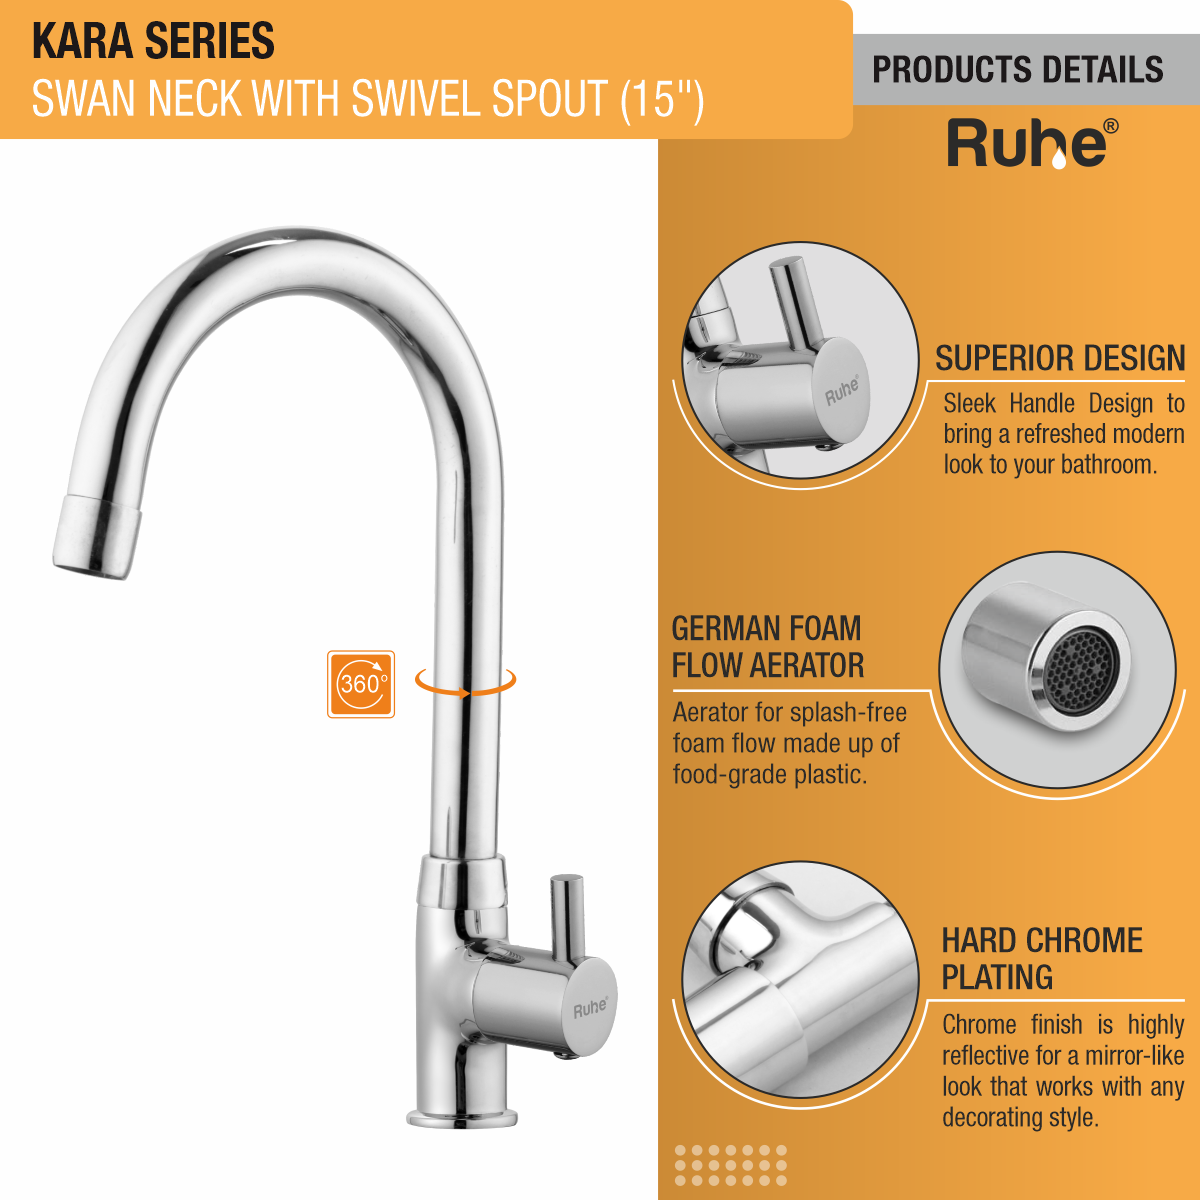 Kara Swan Neck with Medium (15 inches) Round Swivel Spout Brass Faucet product details